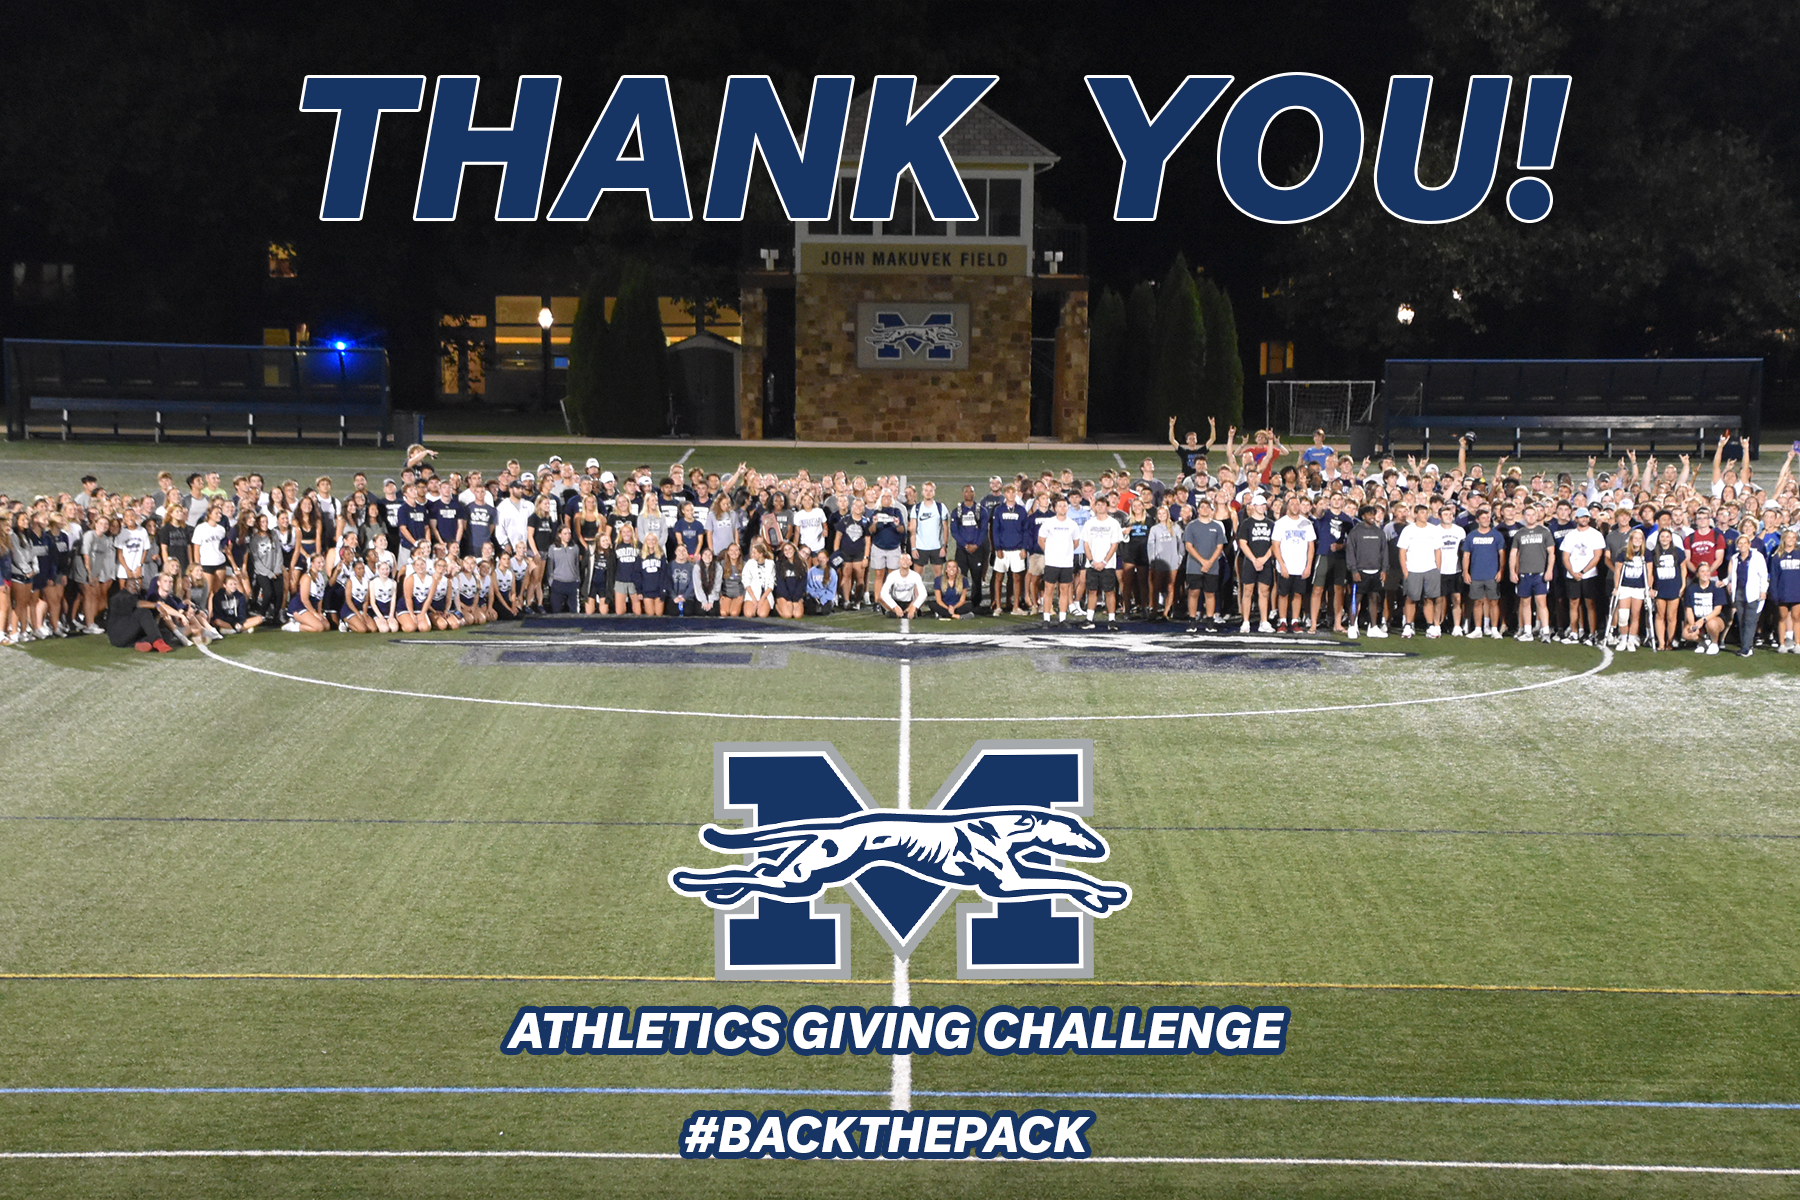 SAAC Kickoff group shot for Athletics Giving Challenge Thank You